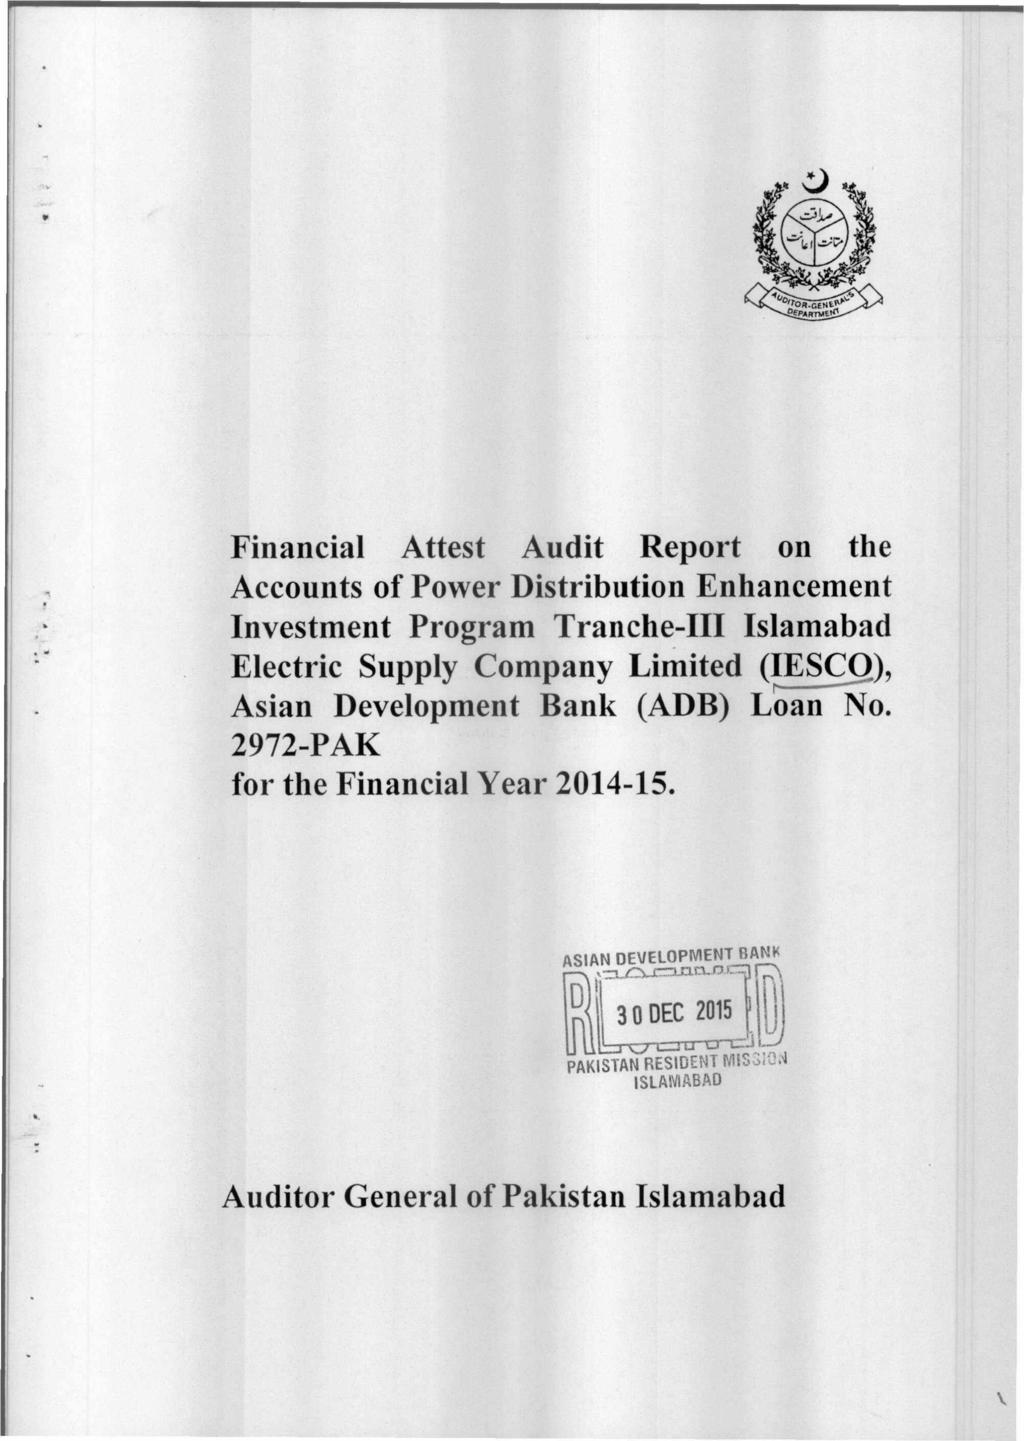 Financial Attest Audit Report on the Accounts of Power Distribution Enhancement Investment Program Tranche-III Islamabad Electric Supply Company Limited (IESCO), Asian Development Bank